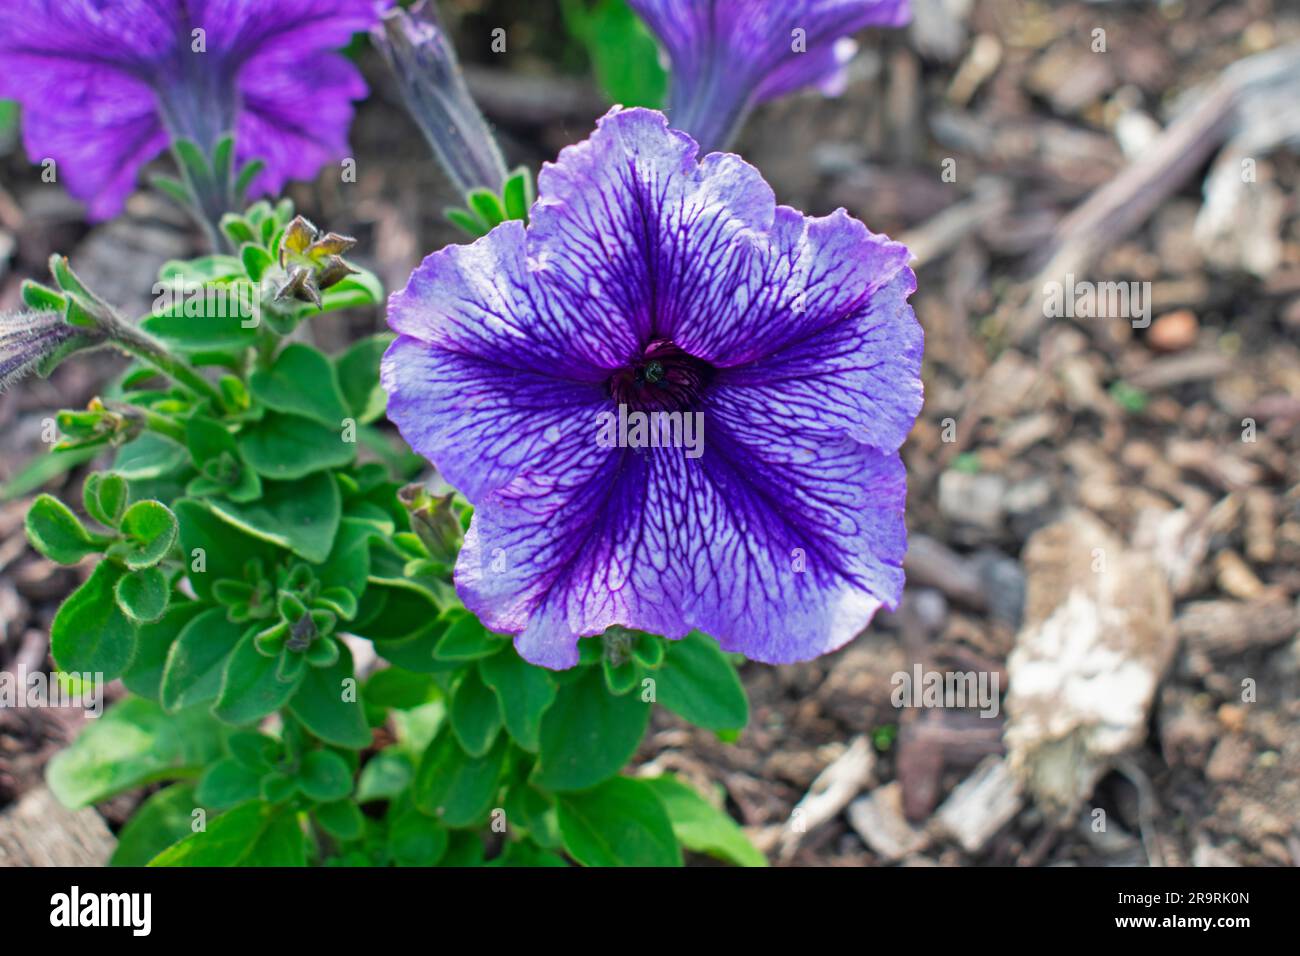 Blue petunia with a dark blue star shaped core, on a bed of green leaves and dried wood chips -01 Stock Photo